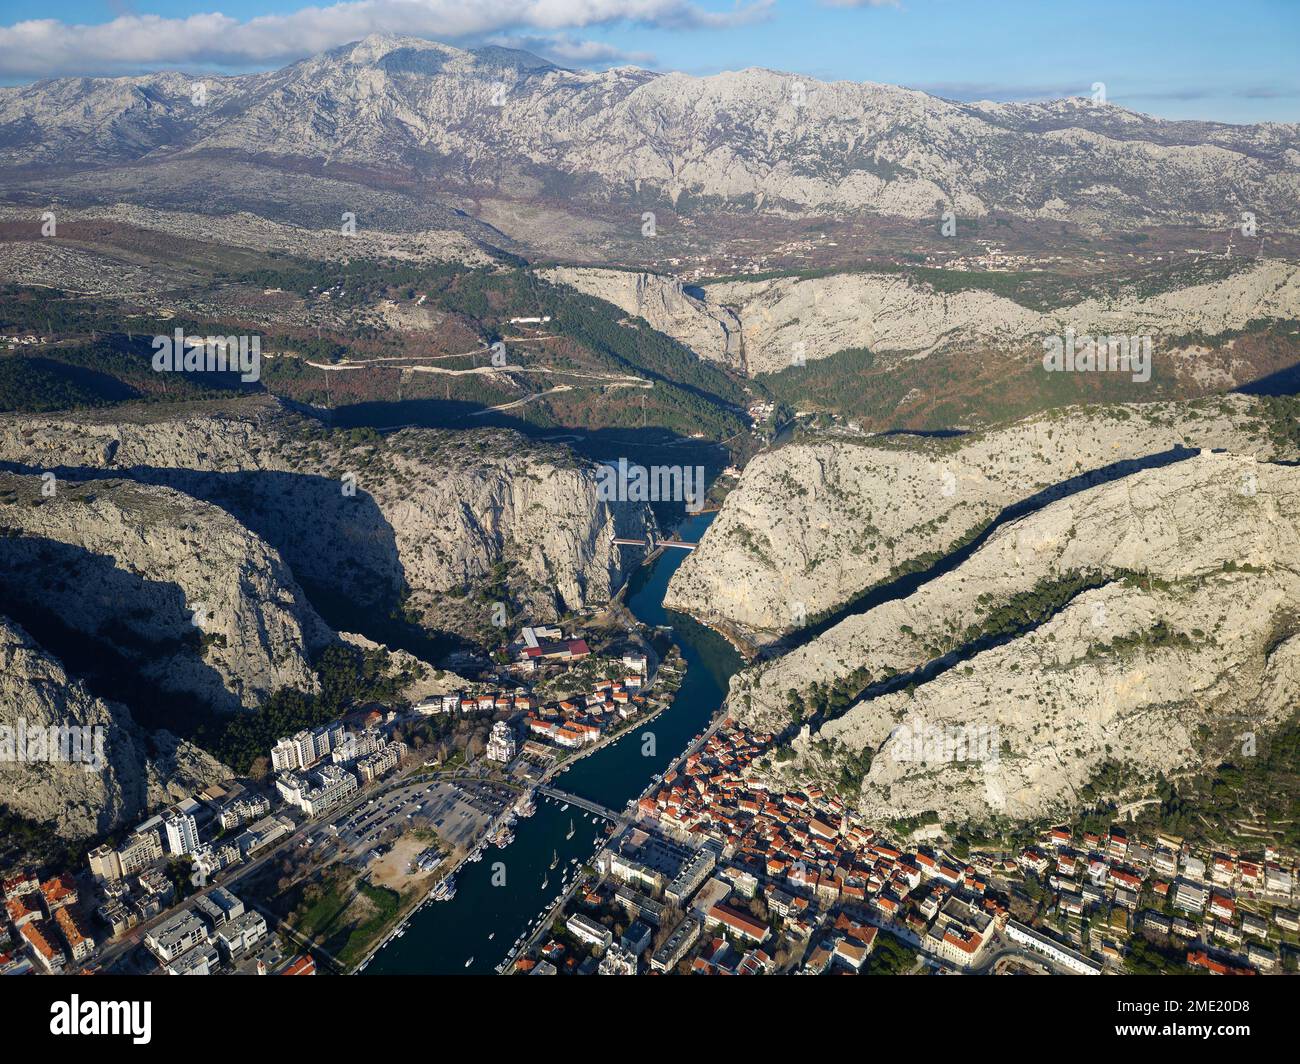 Aerial drone view of Omis town in Croatia. Location is where the Cetina River meets the Adriatic Sea.  Beautiful city next to the mountains. Stock Photo